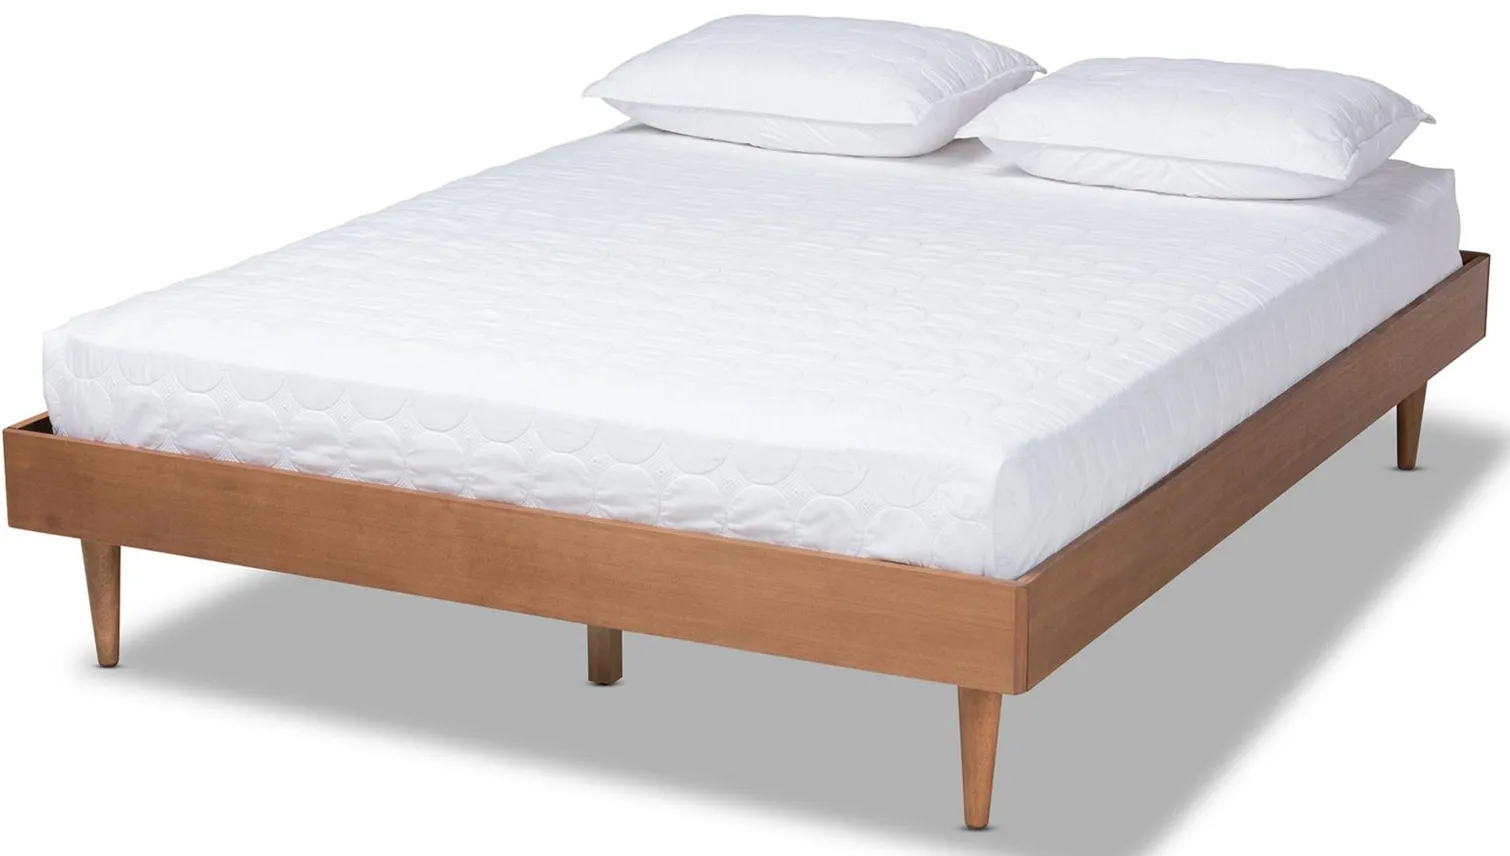 Rina Mid-Century Queen Size Wood Bed Frame in Ash Walnut by Wholesale Interiors